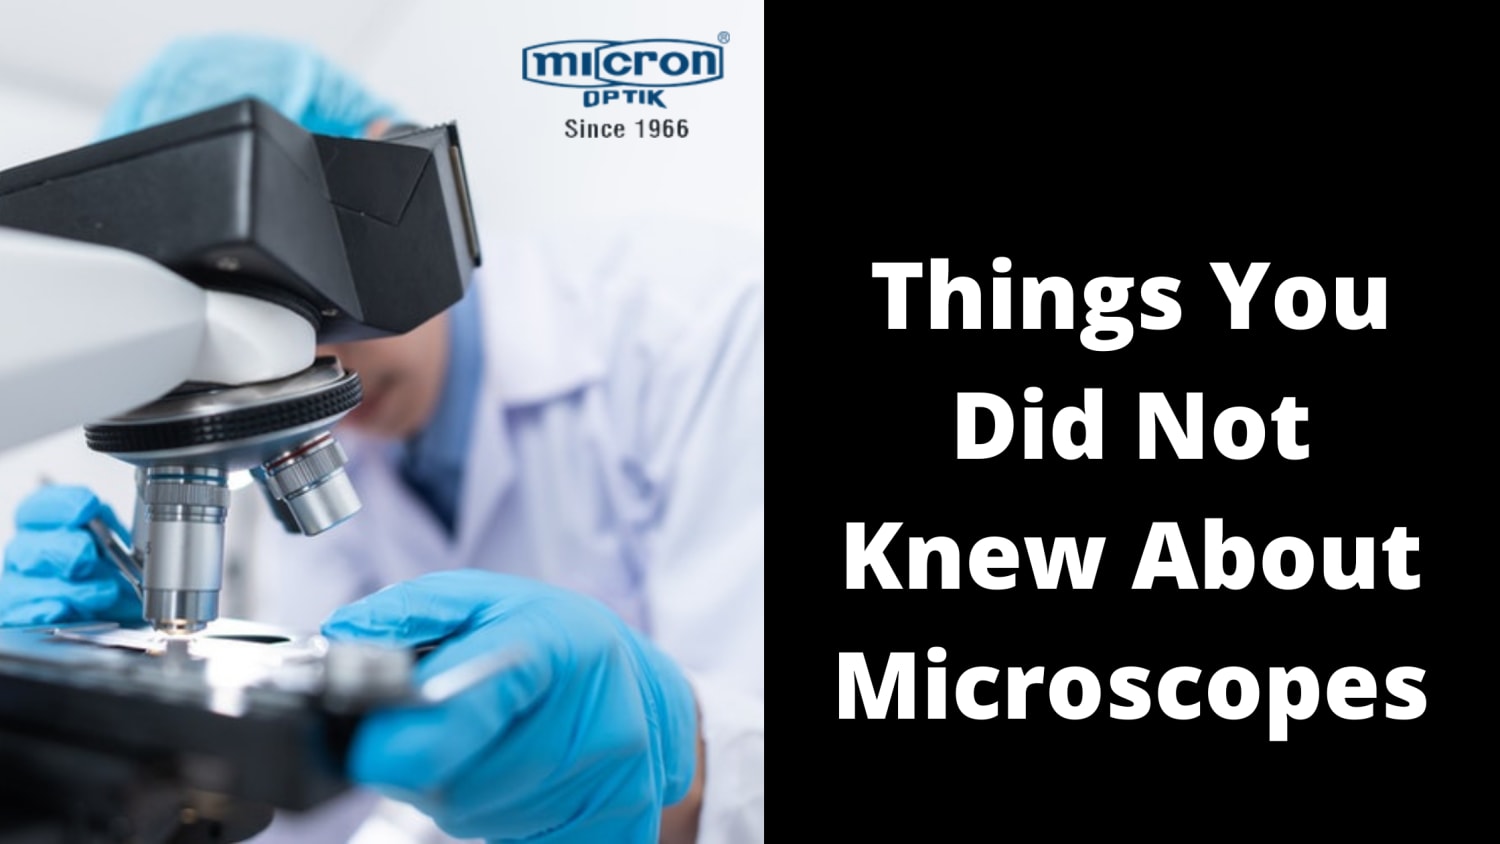 Things That You Did Not Know About Microscopes